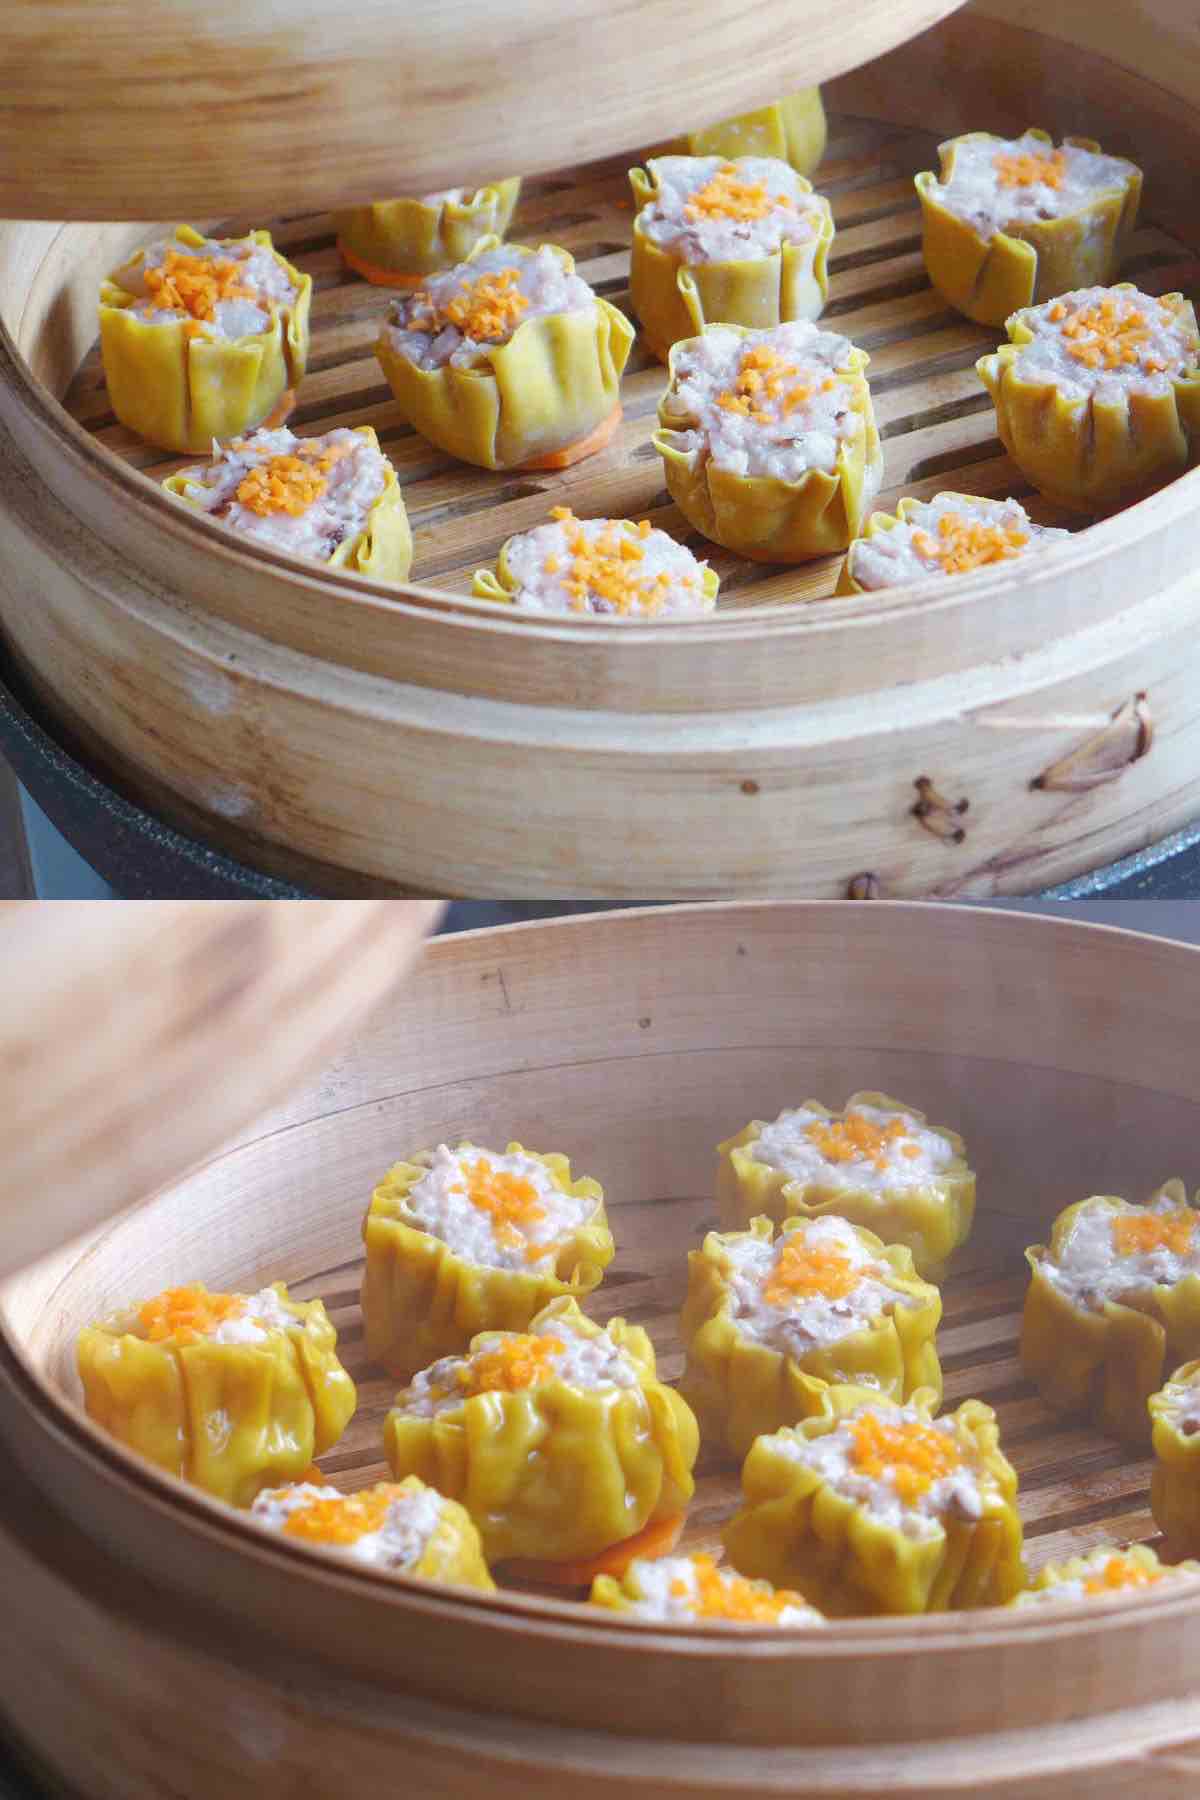 Siu Mai before and after steaming.